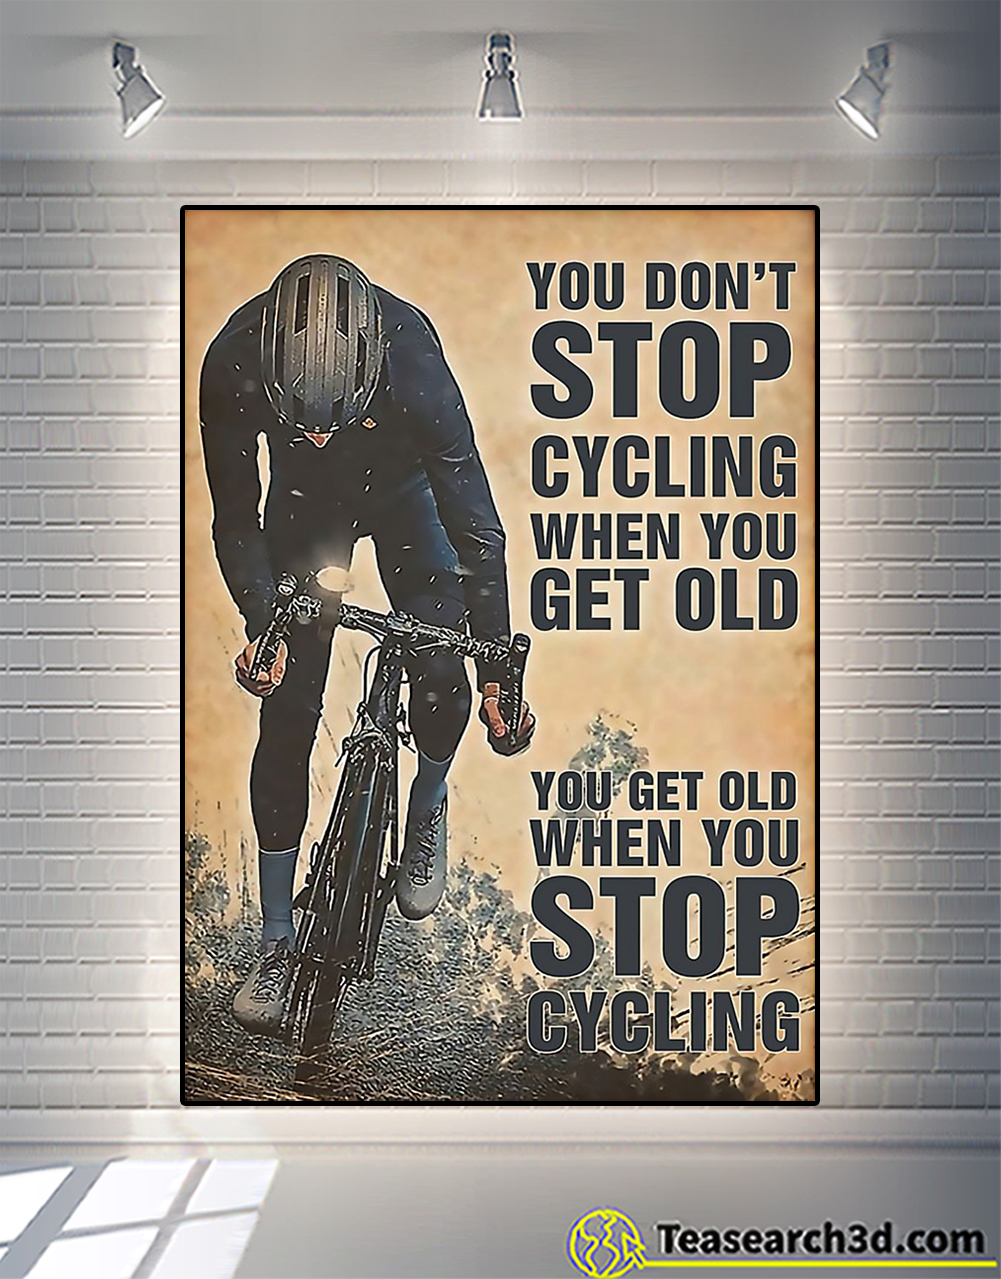 You don't stop cycling when you get old poster